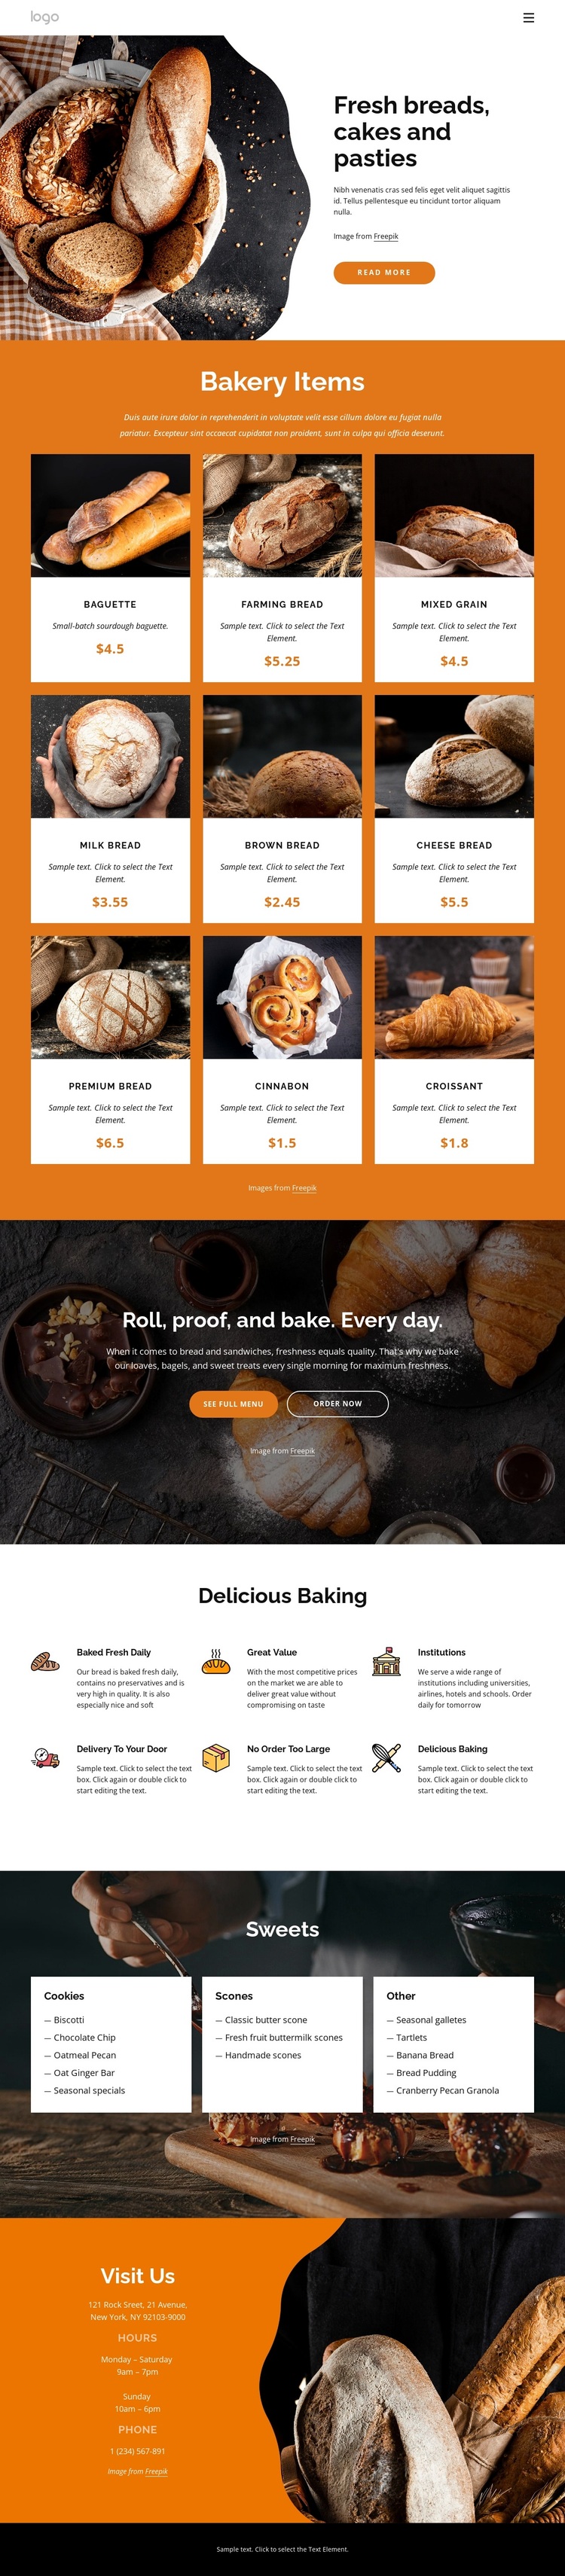 Fresh breads and cakes Joomla Page Builder